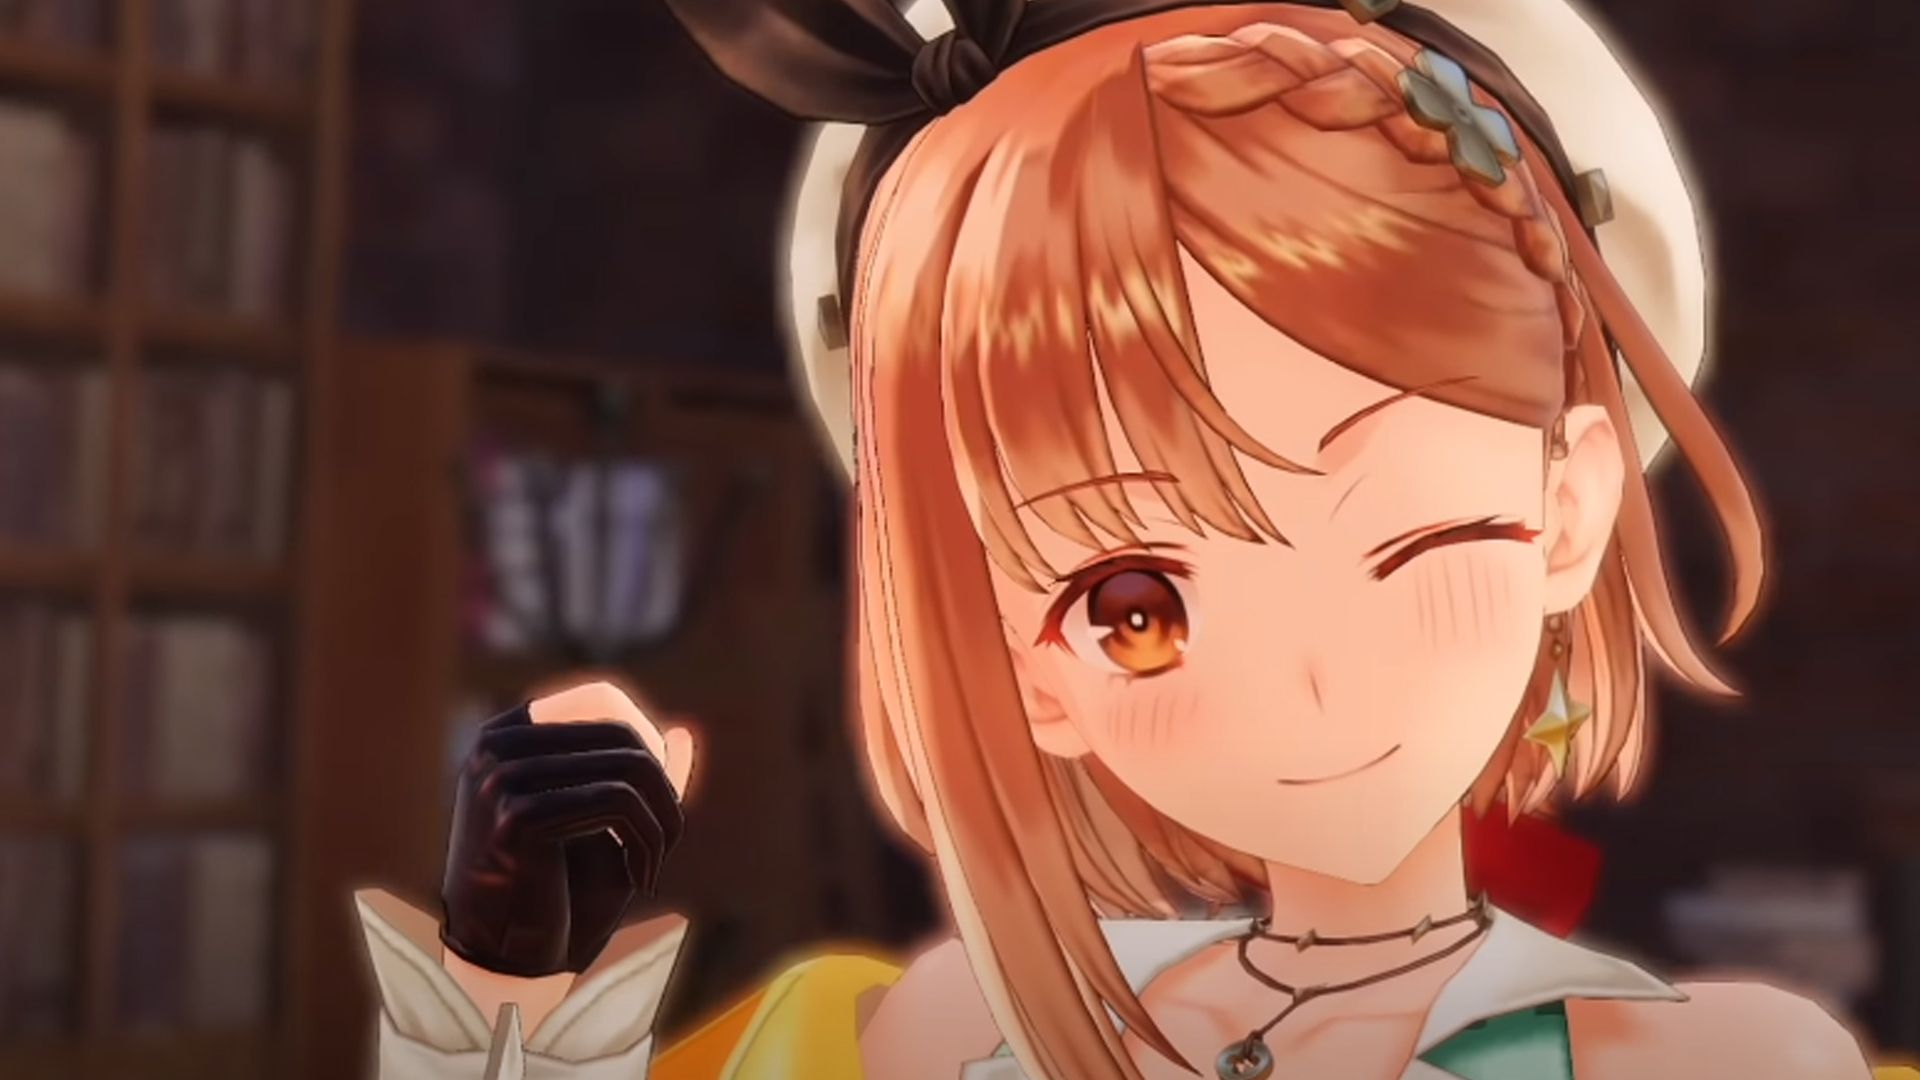 Atelier Ryza 2: Lost Legends & the Secret Fairy Prologue Released, Nintendo Switch Gameplay Showcased • The Mako Reactor